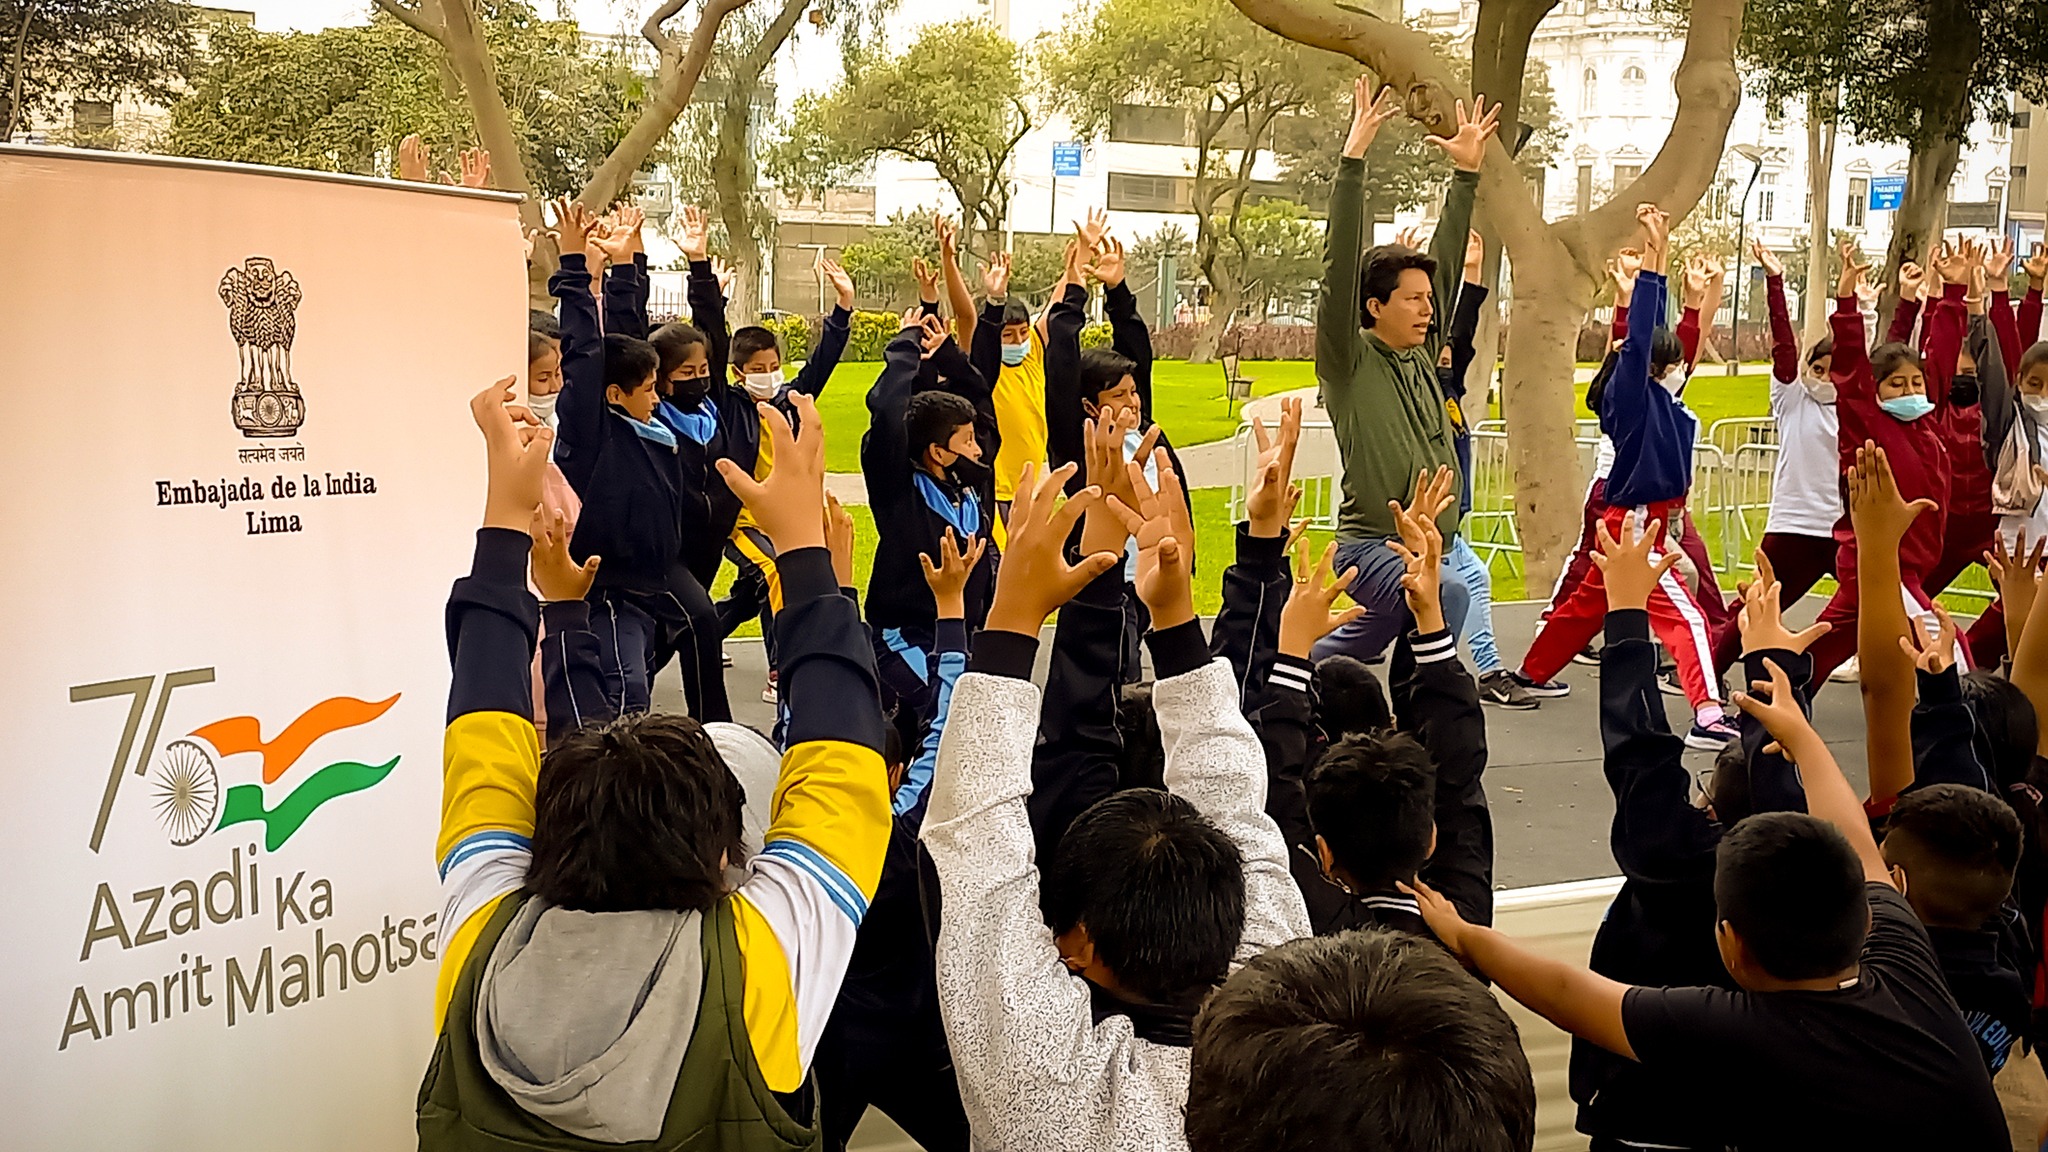 Yoga for children event in the 7th International Book fair in Lima in collaboration with Muncipality of Lima